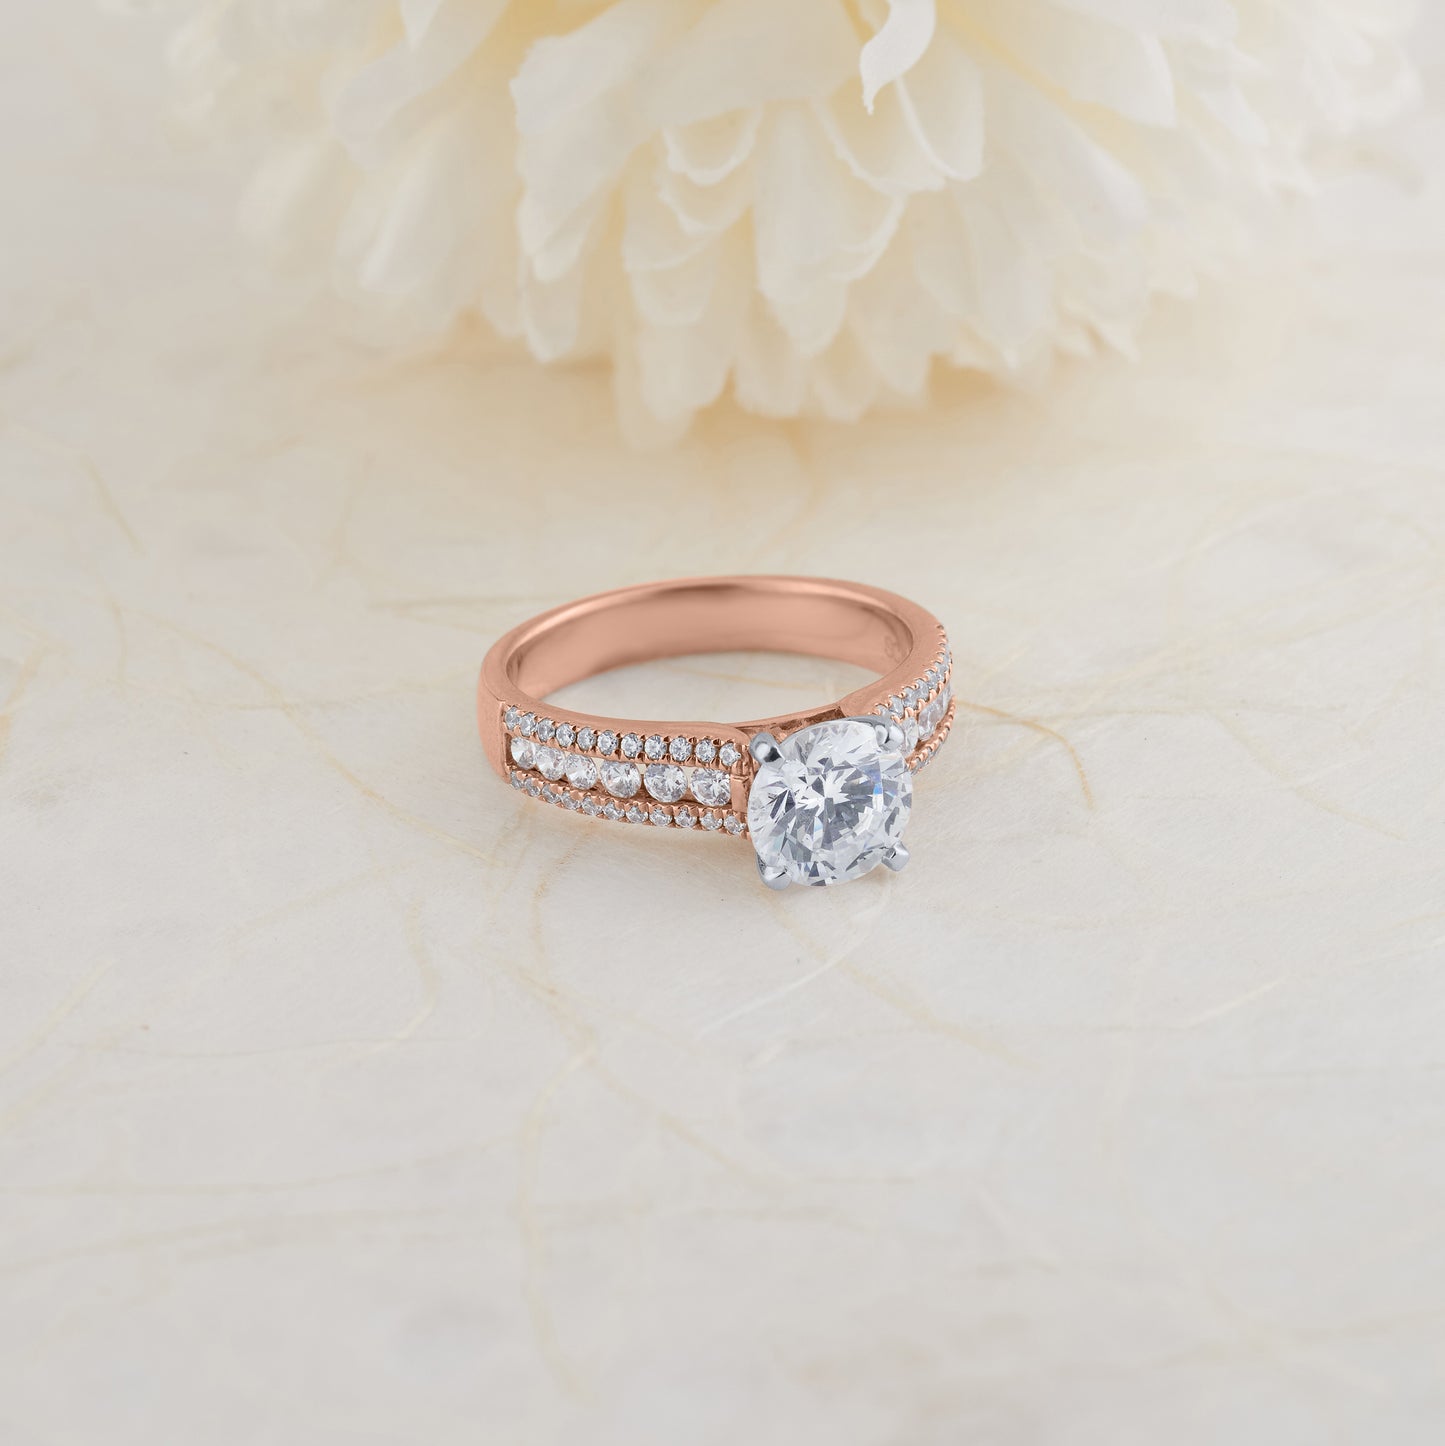 18K Rose Gold and Platinum Round Brilliant Diamond Solitaire with Accent Shoulders Engagement Ring 2.0tdw